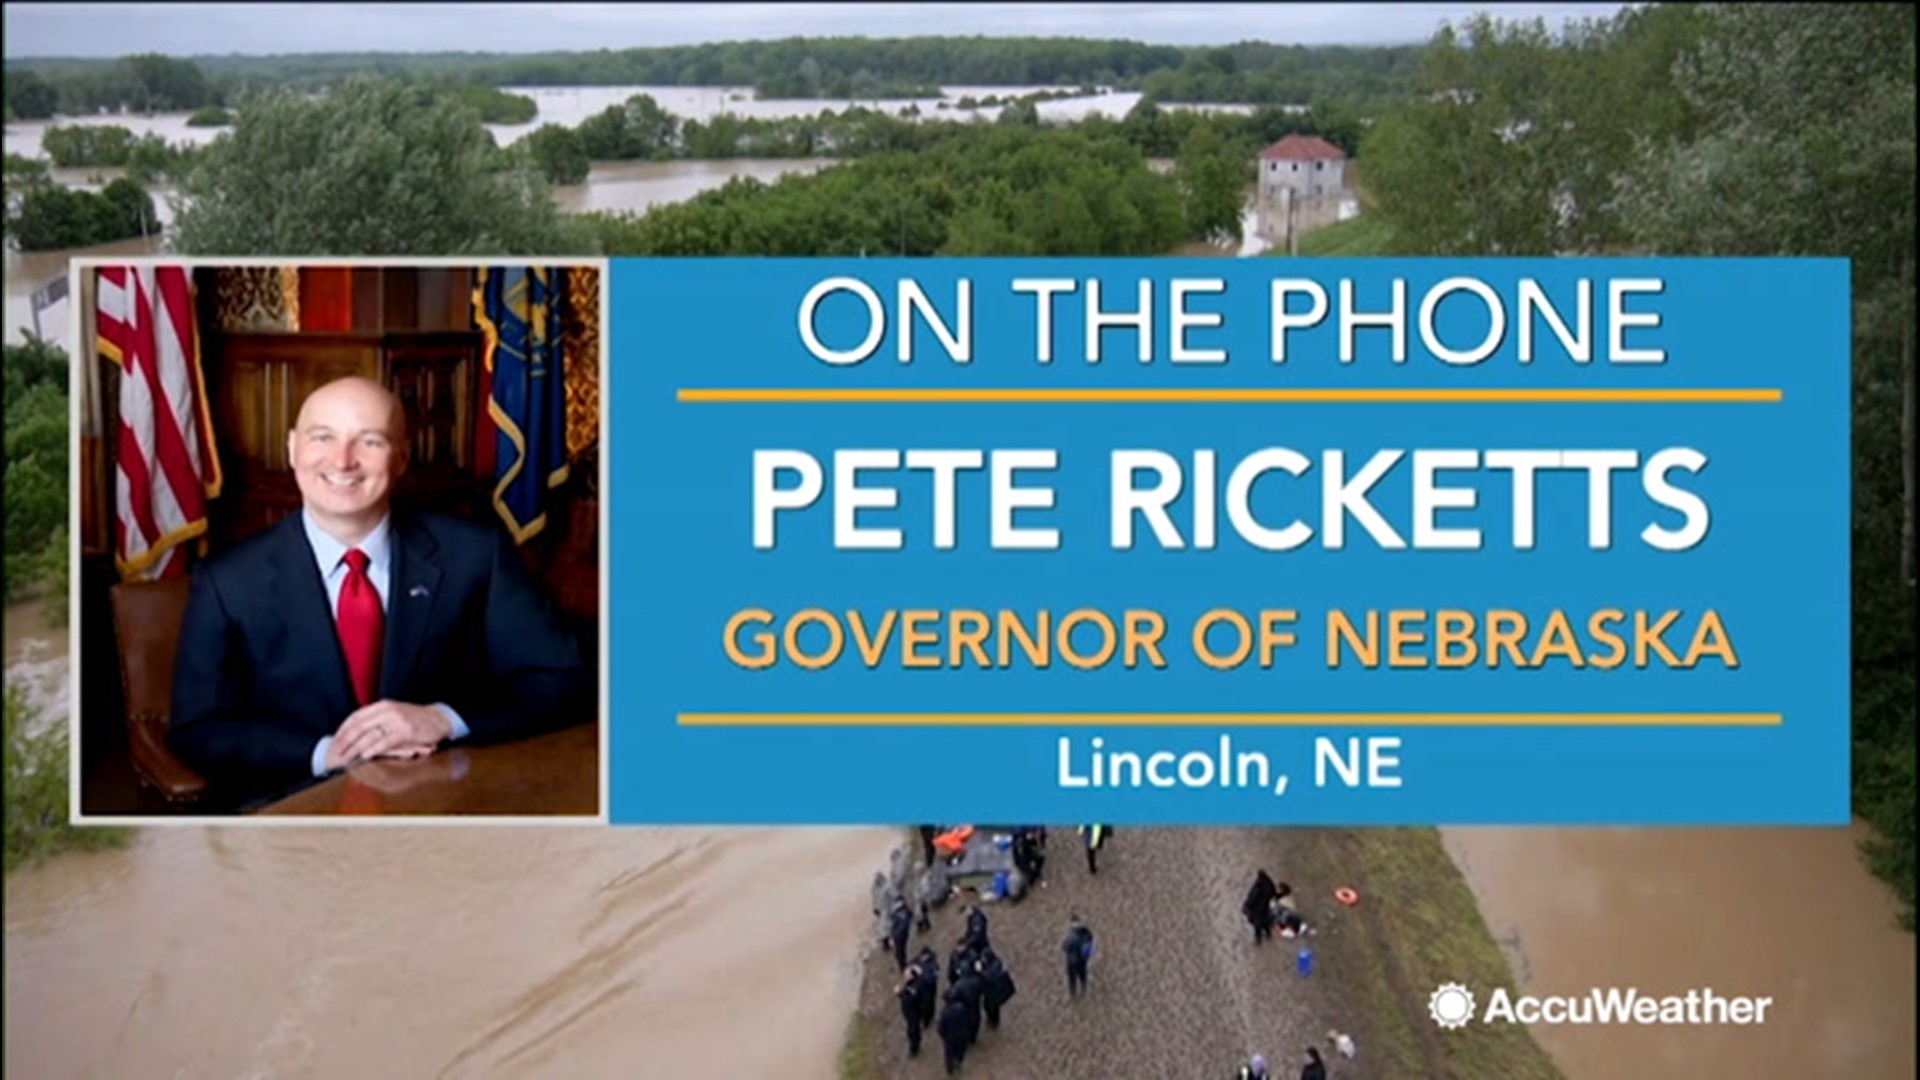 Gov. Pete Ricketts said on June 14 that Nebraska was going to rebuild after devestating floods crippled the state